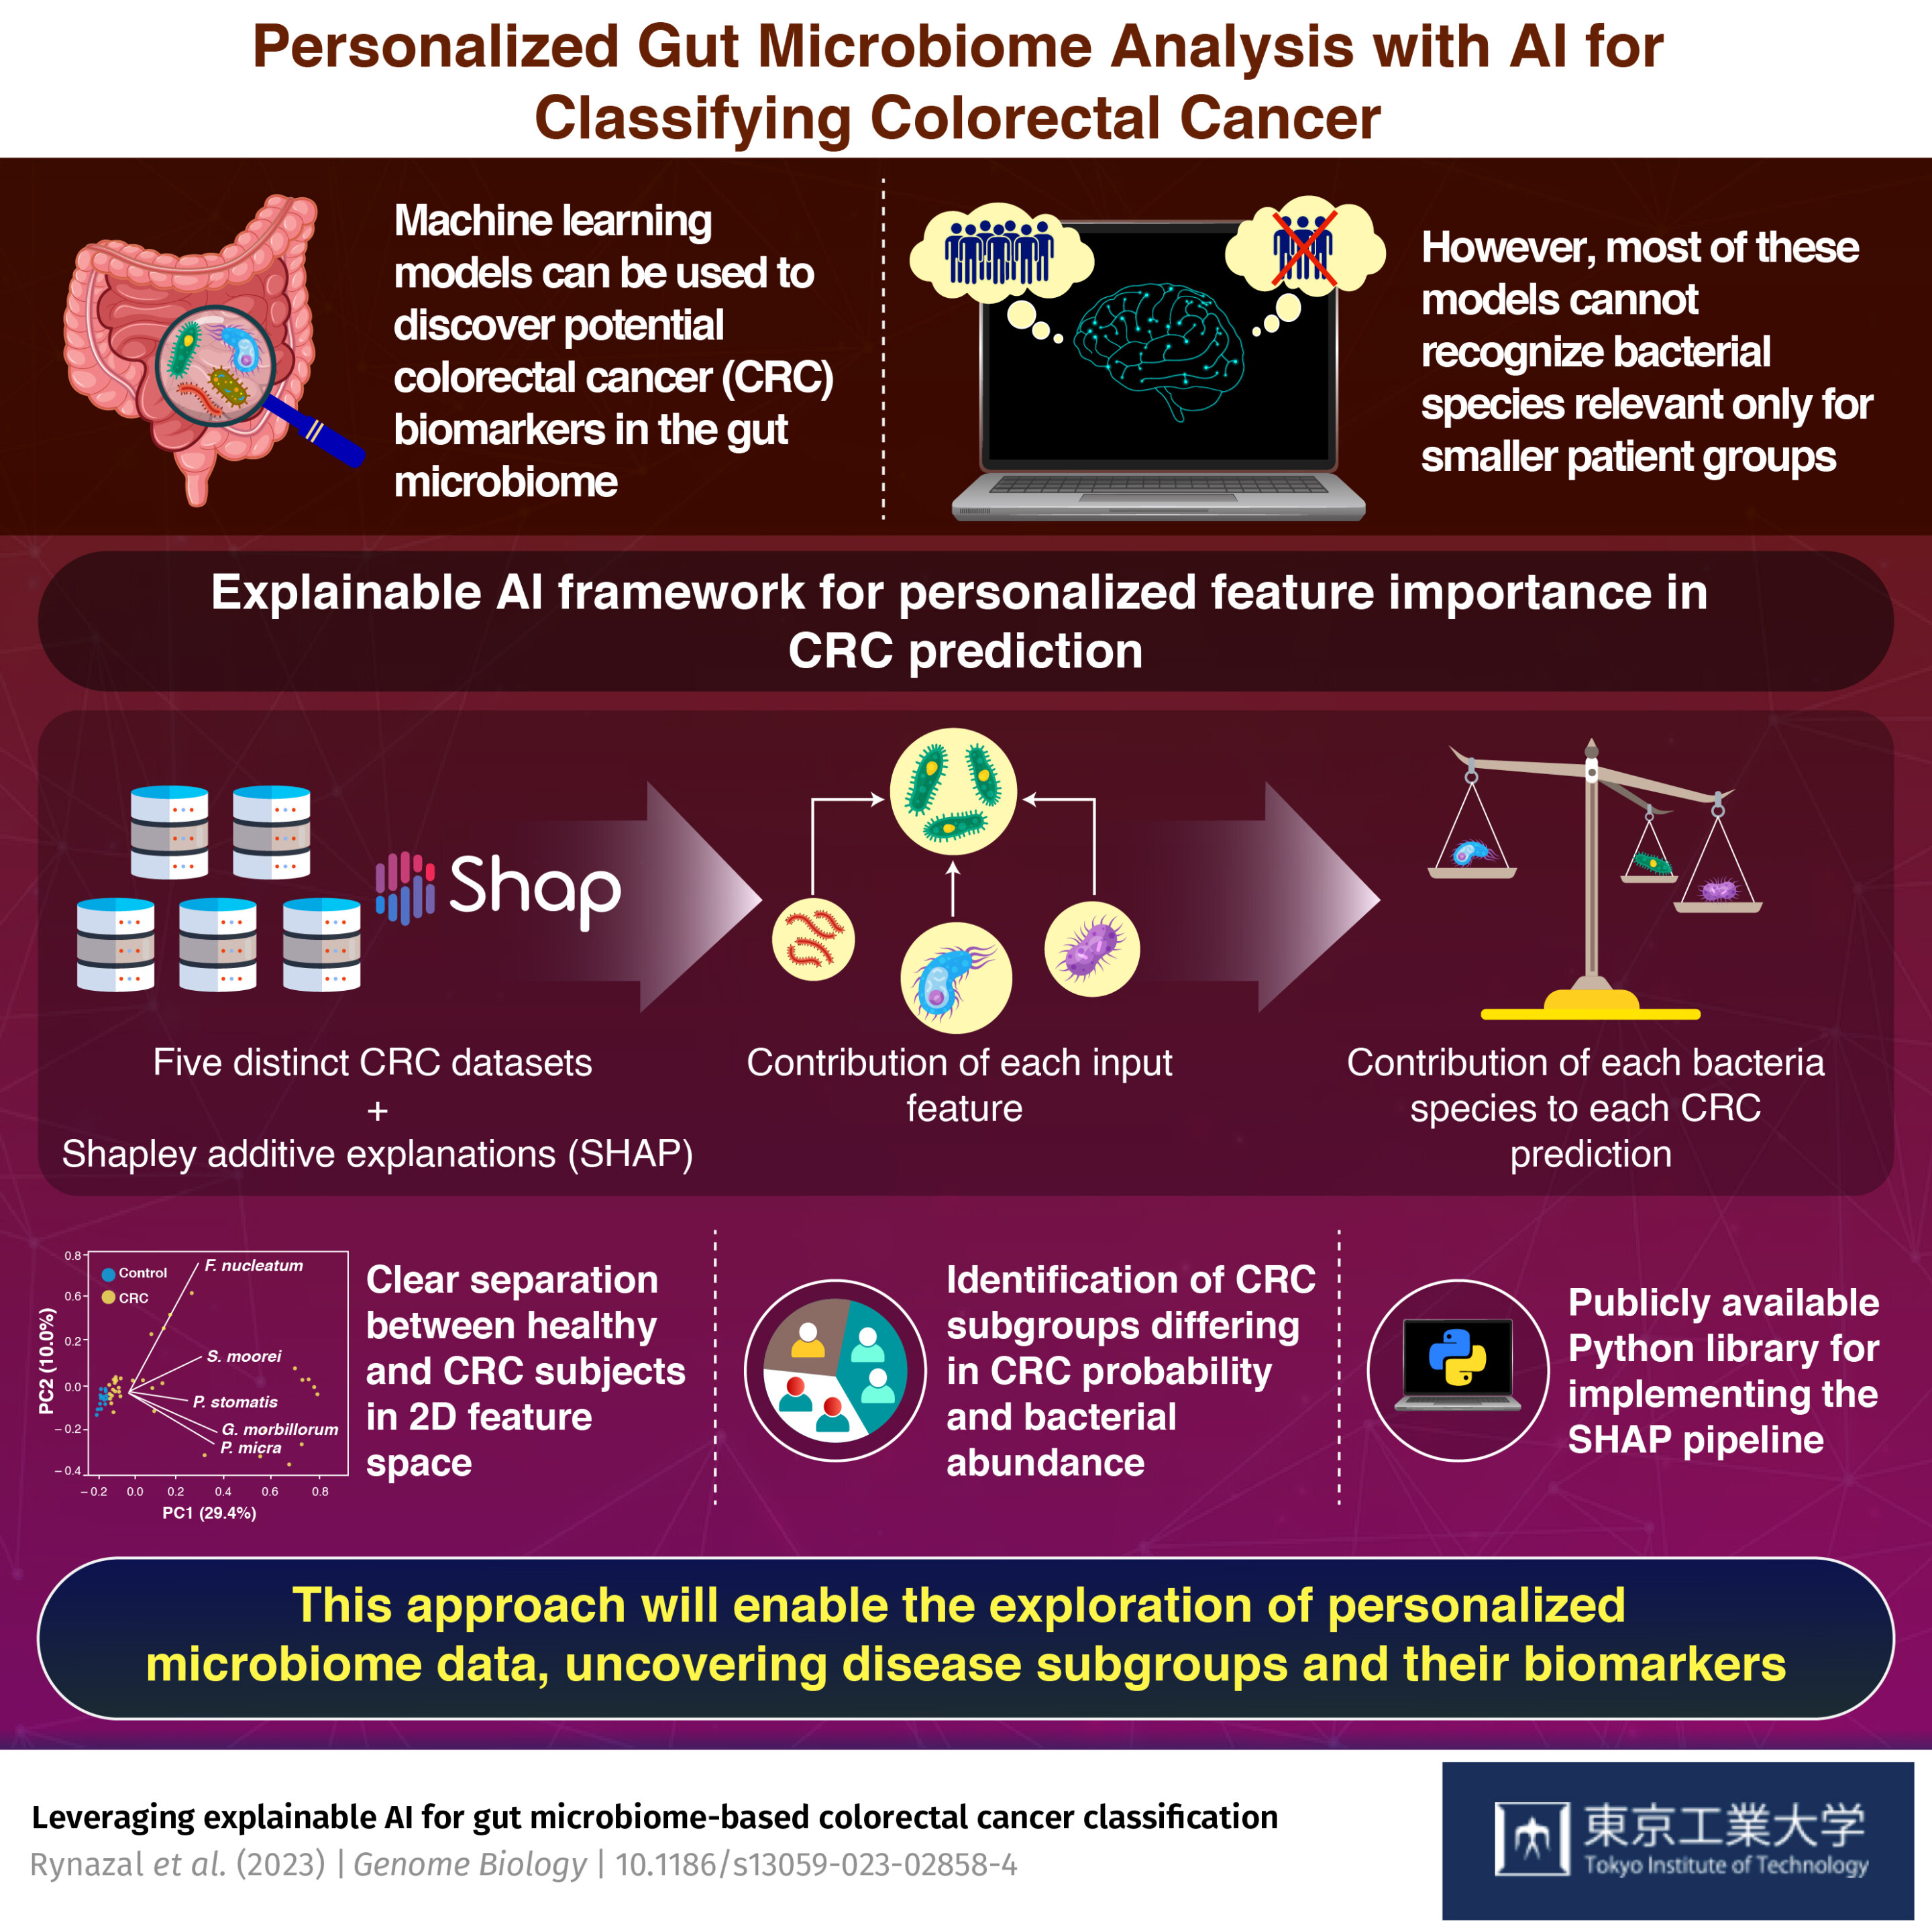 Personalized gut microbiome analysis for colorectal cancer classification with explainable AI - health articles - Health - Public News Time